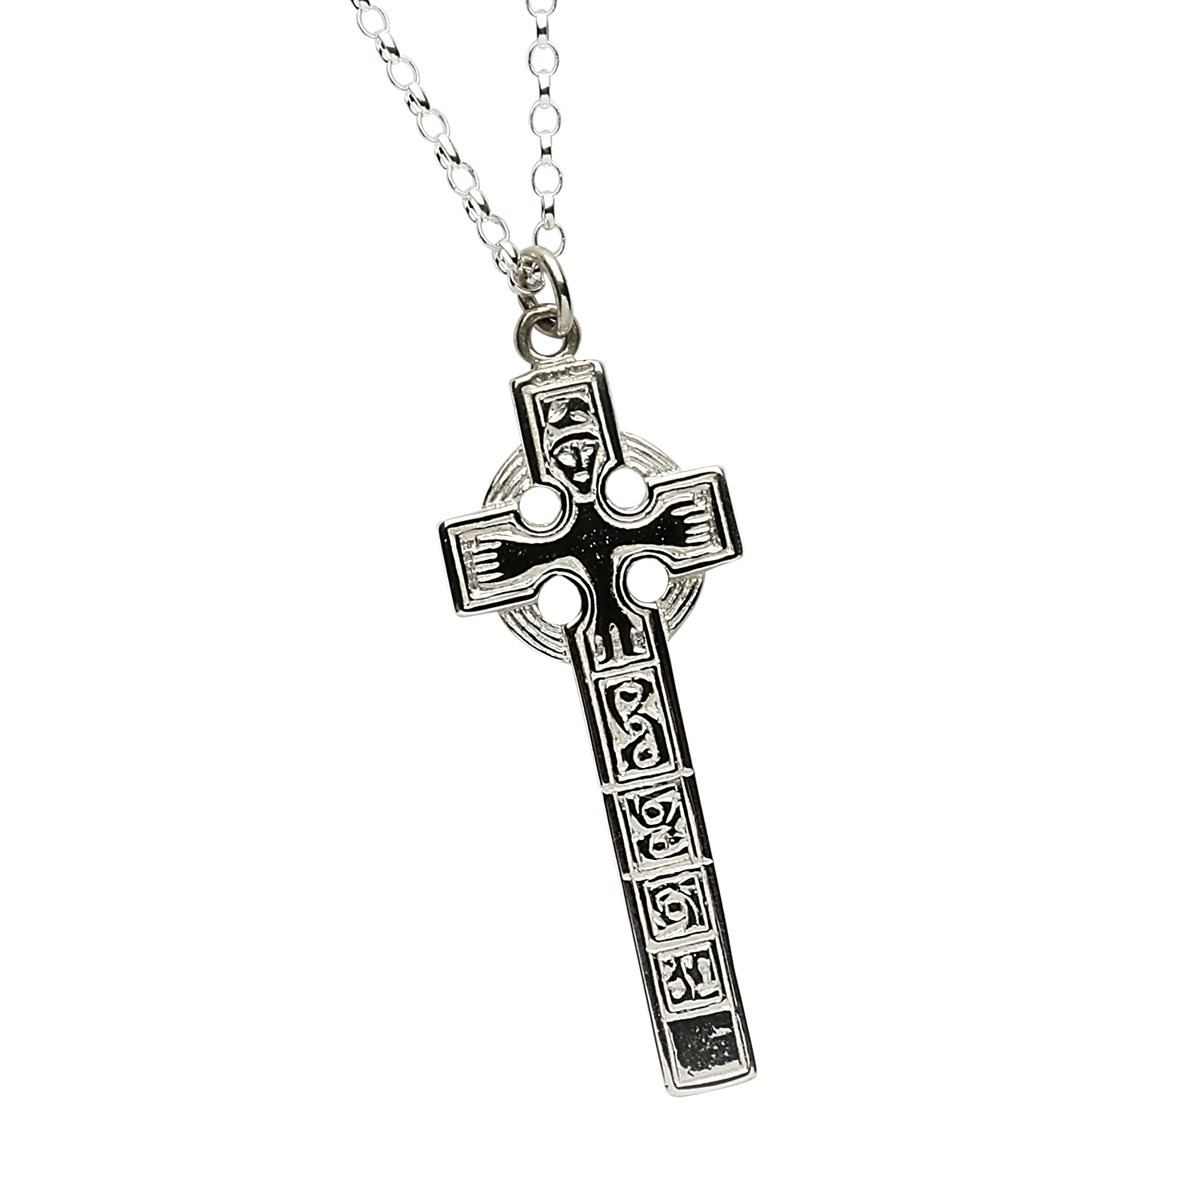 Moone High Cross Silver Necklace - Front